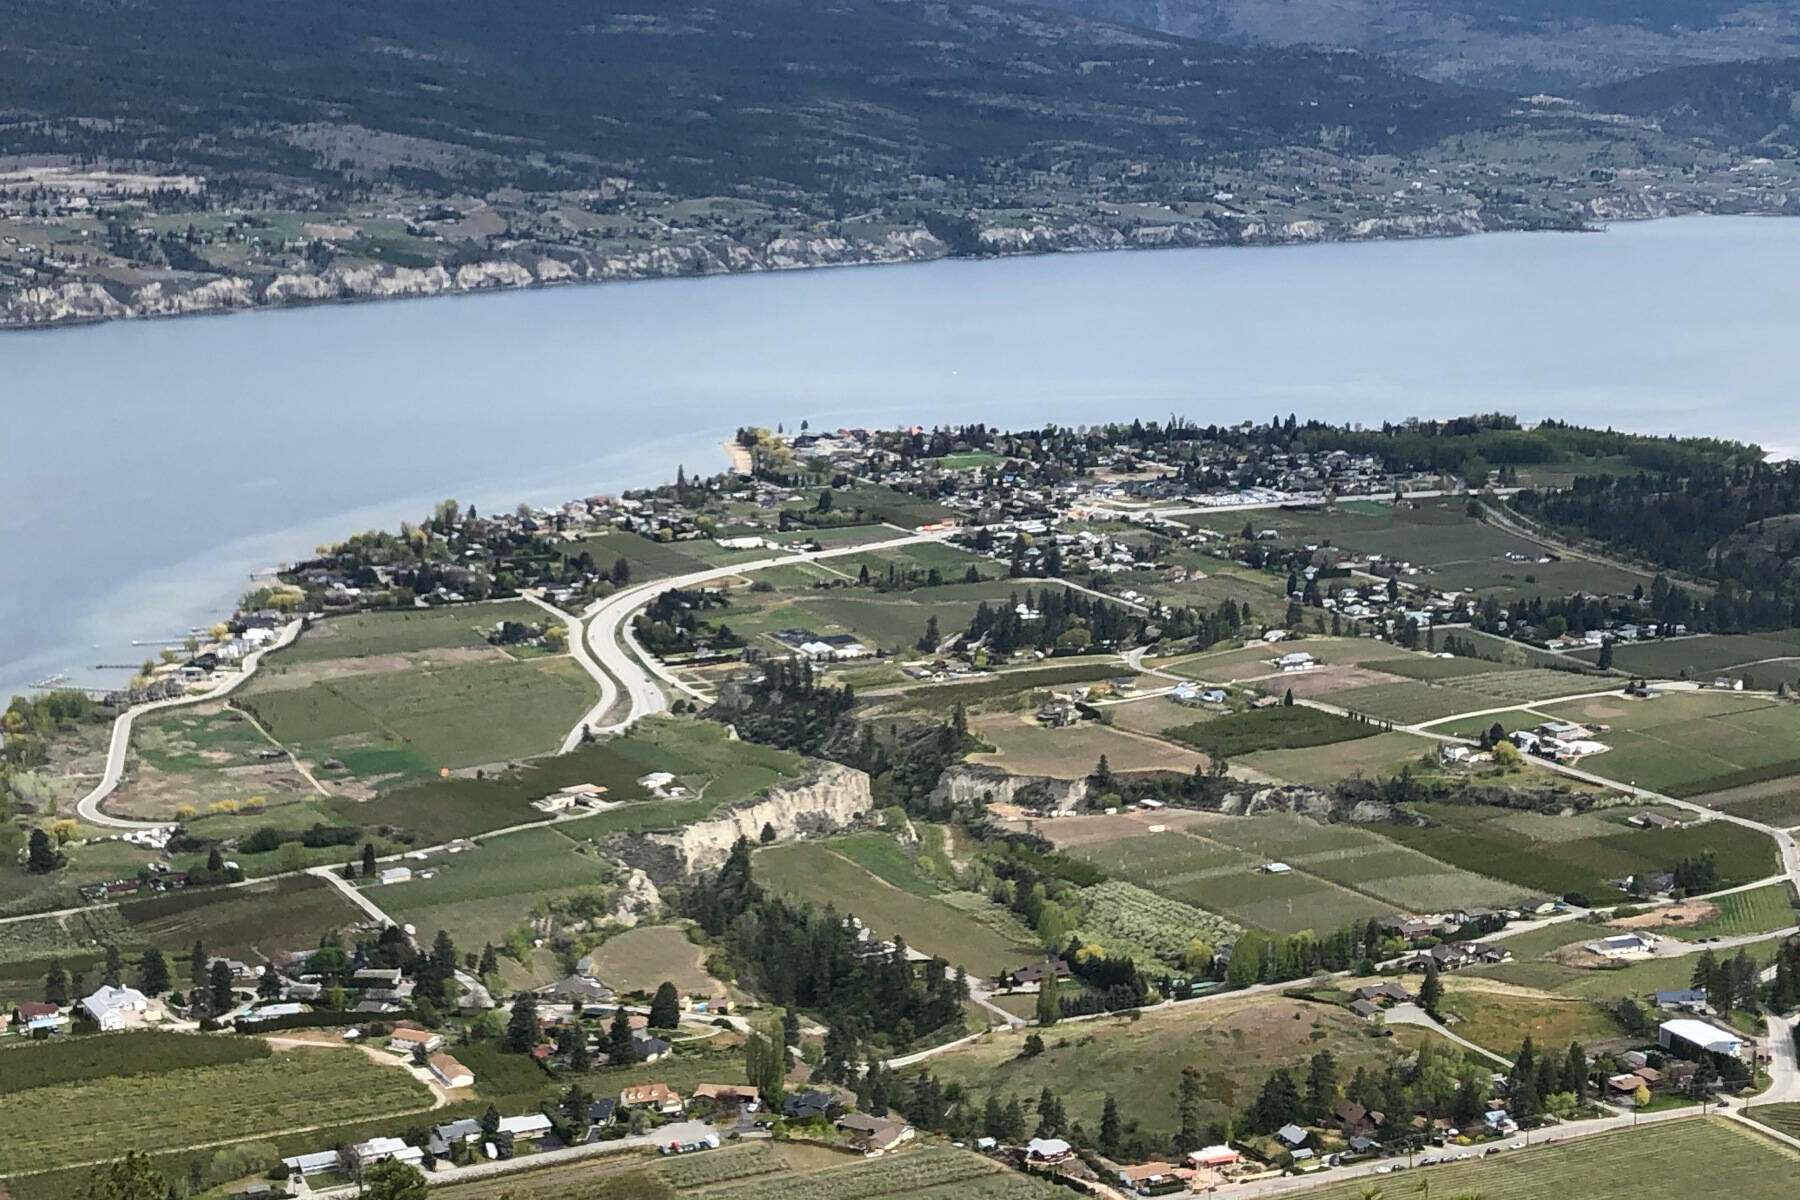 There are plenty of streets to explore in communities around the province. This view, from the top of Giant’s Head Mountain in Summerland, shows a portion of the lakefront area in that community. (John Arendt - Summerland Review)